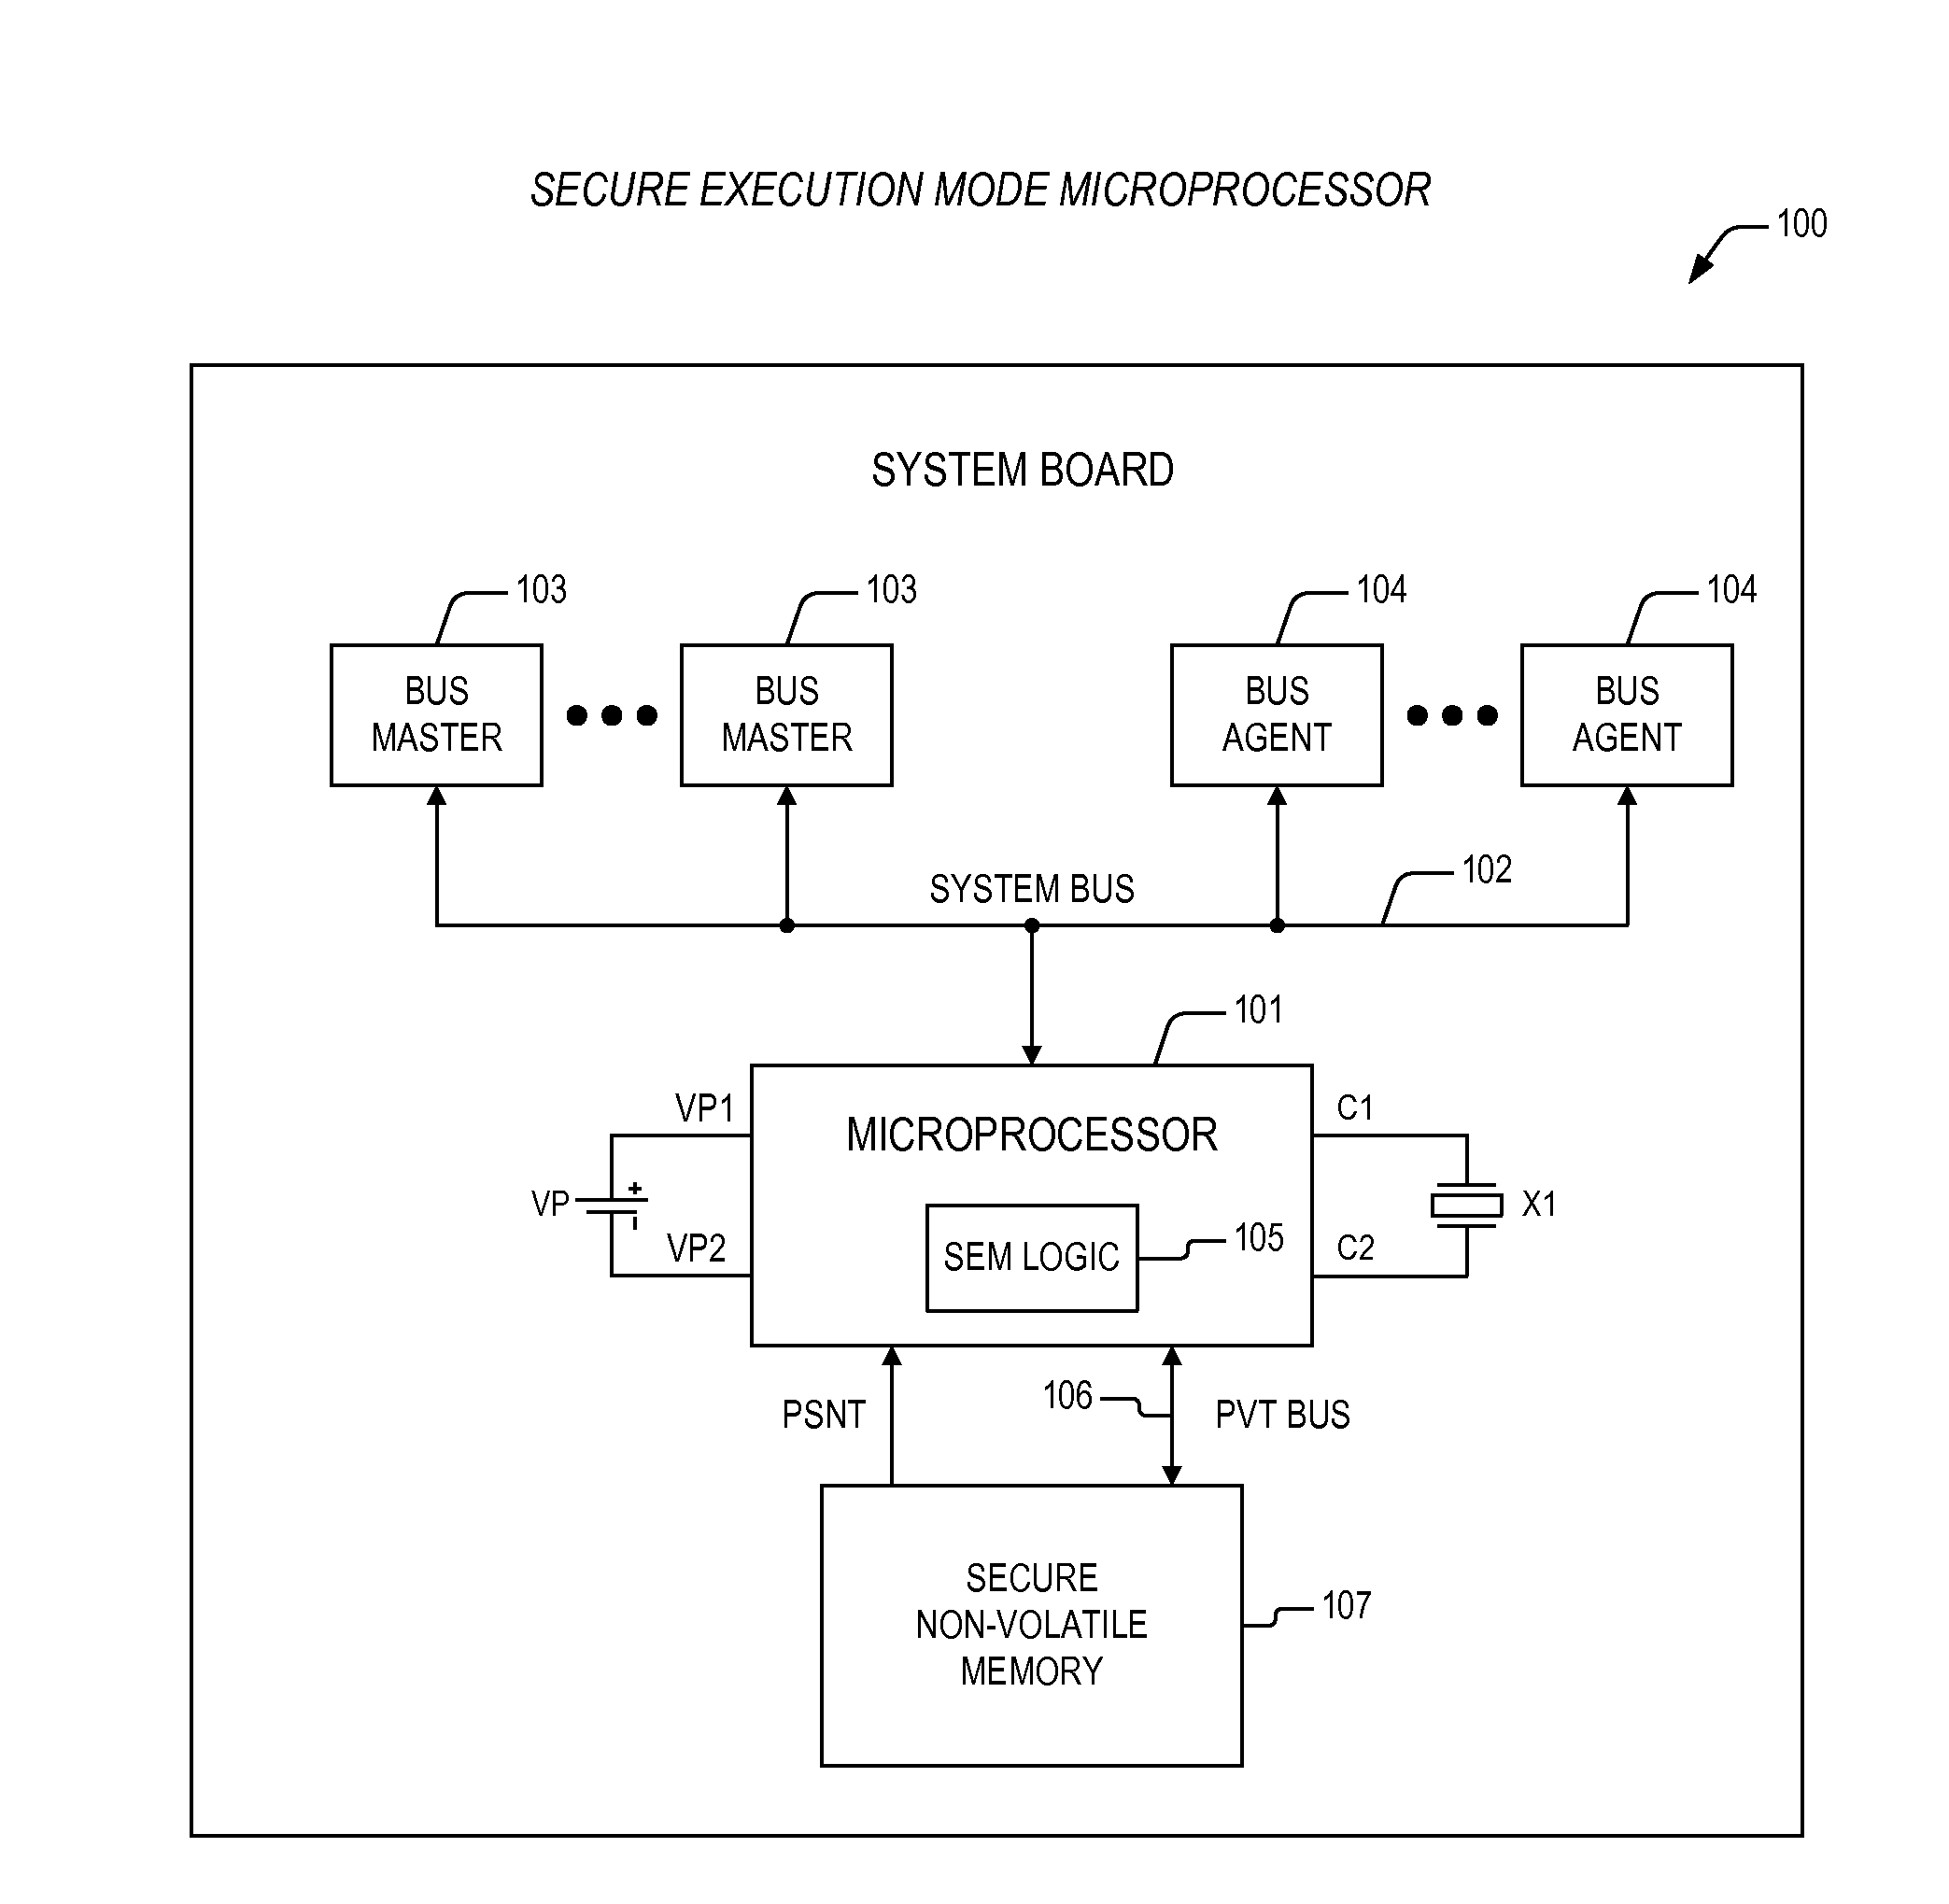 Initialization of a microprocessor providing for execution of secure code